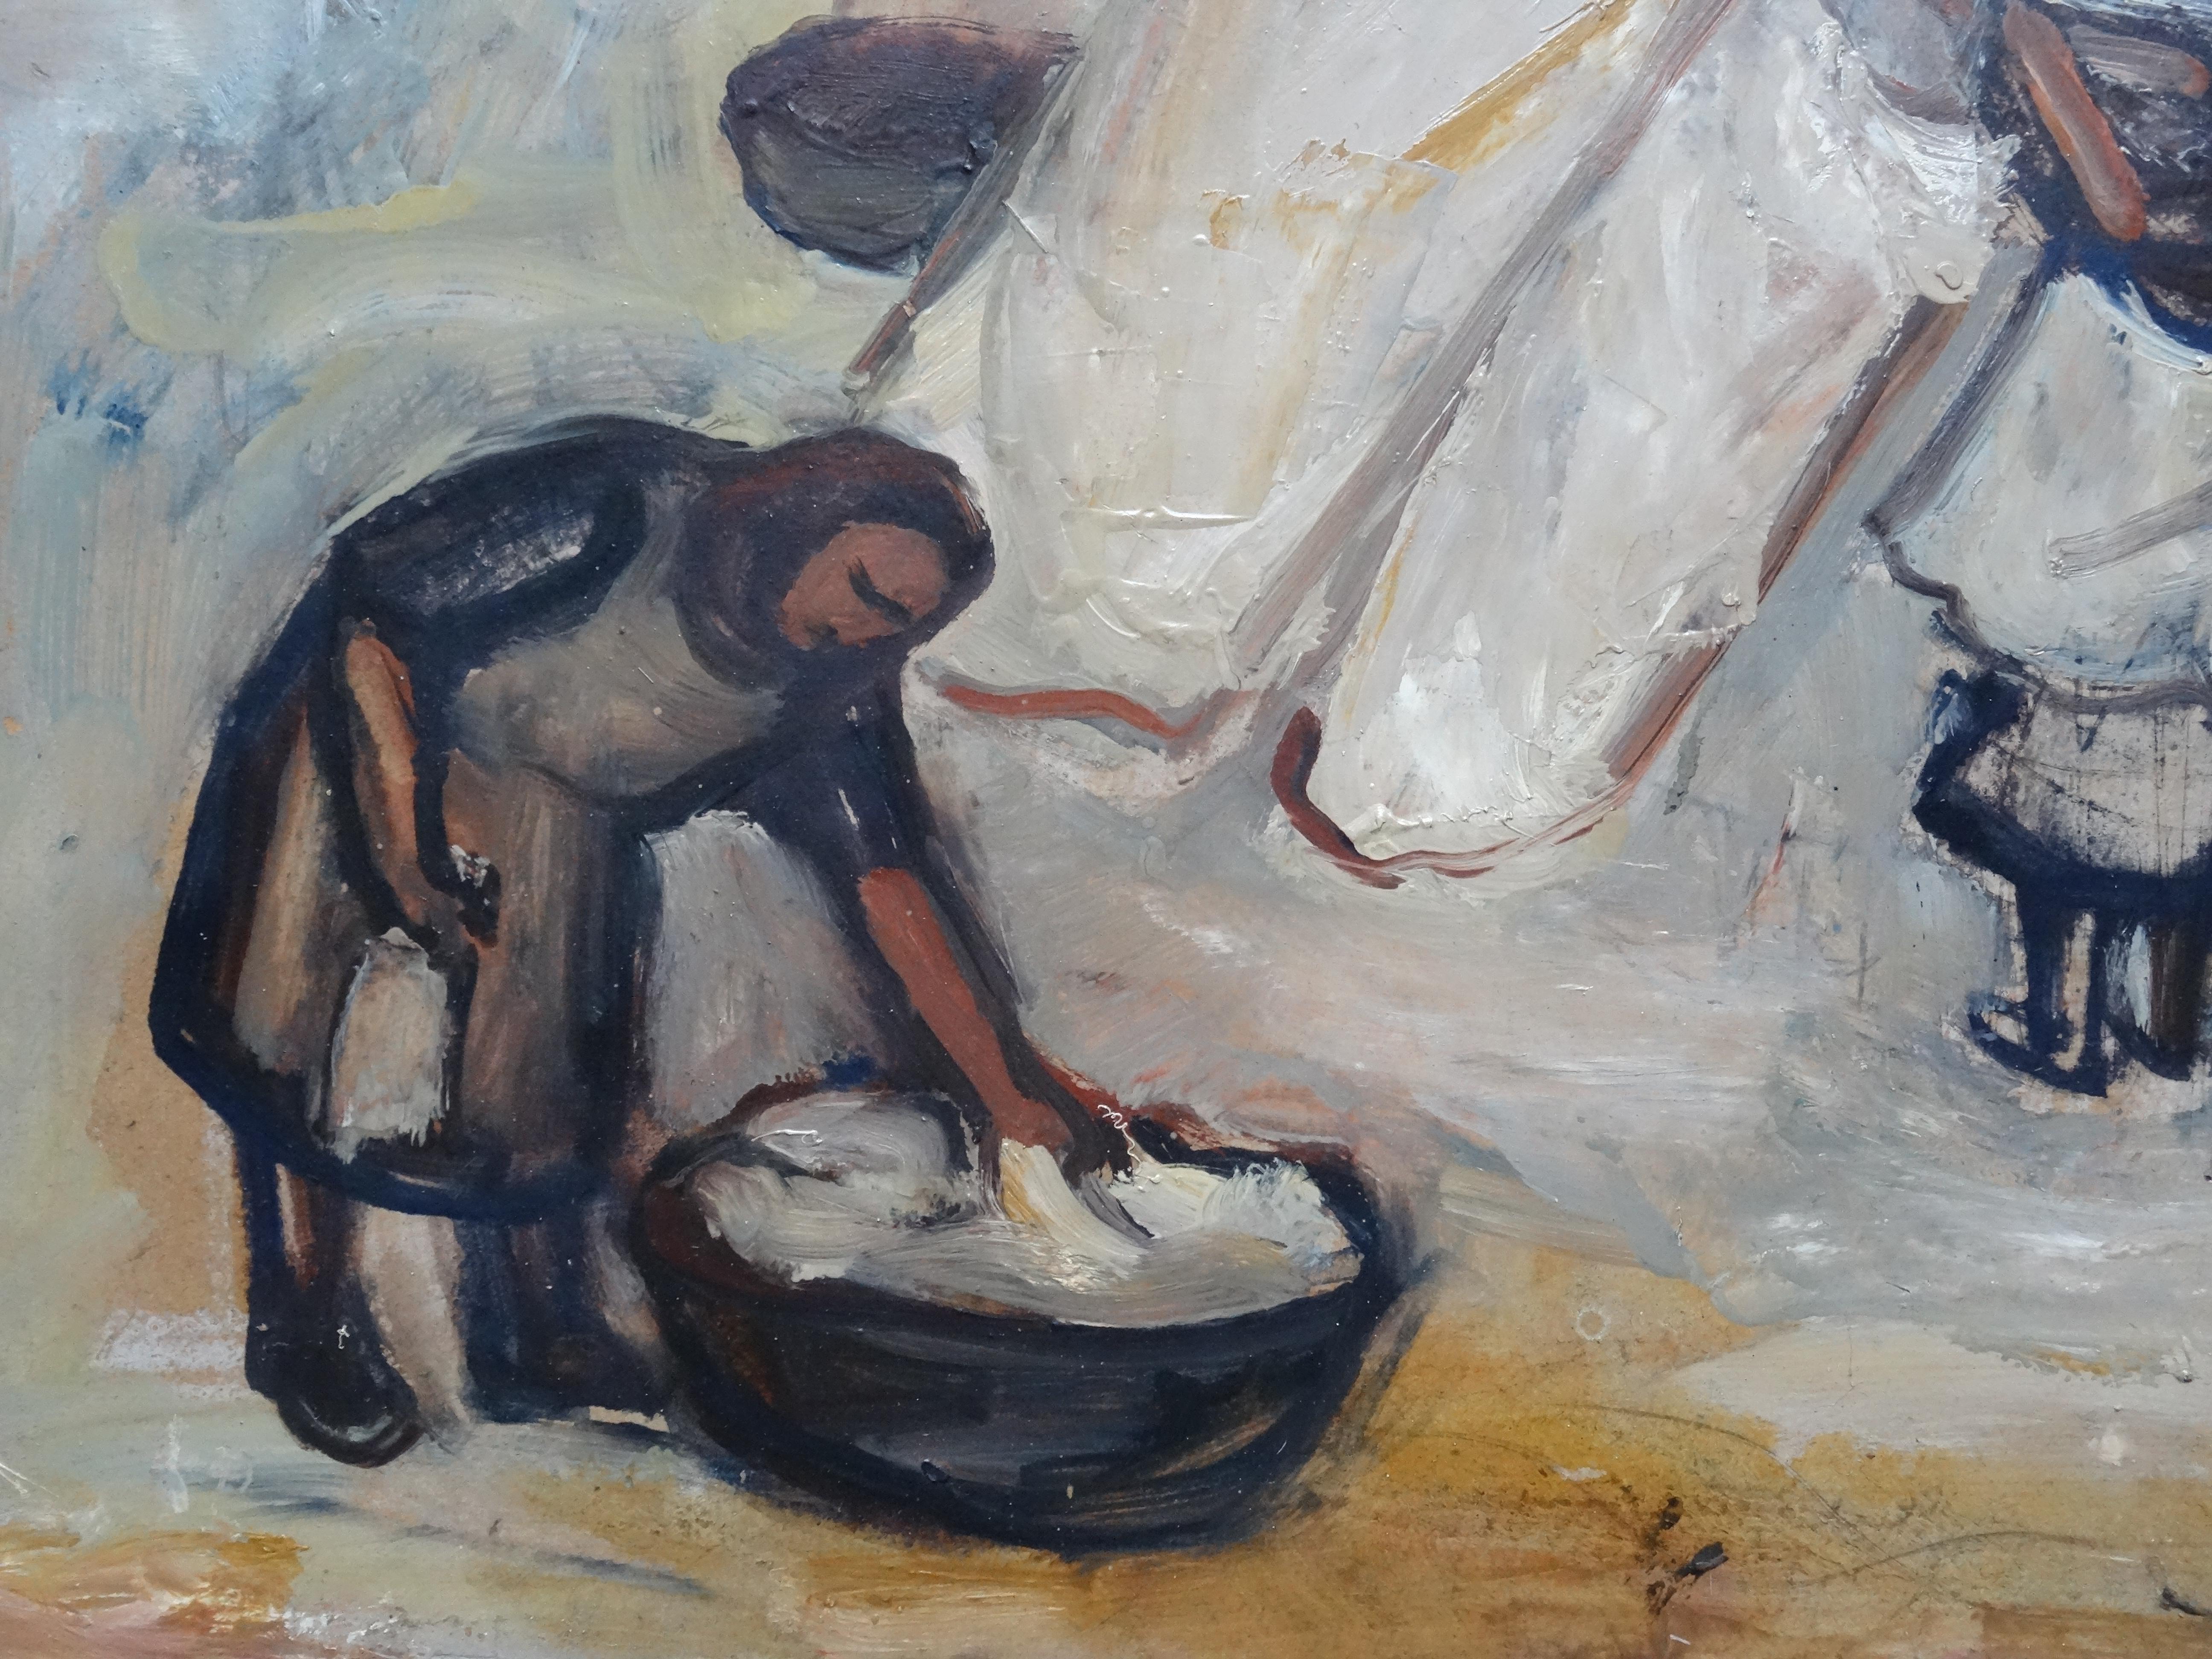 The laundry is drying  1950s, oil on cardboard, 51x74 cm - Painting by Biruta Baumane